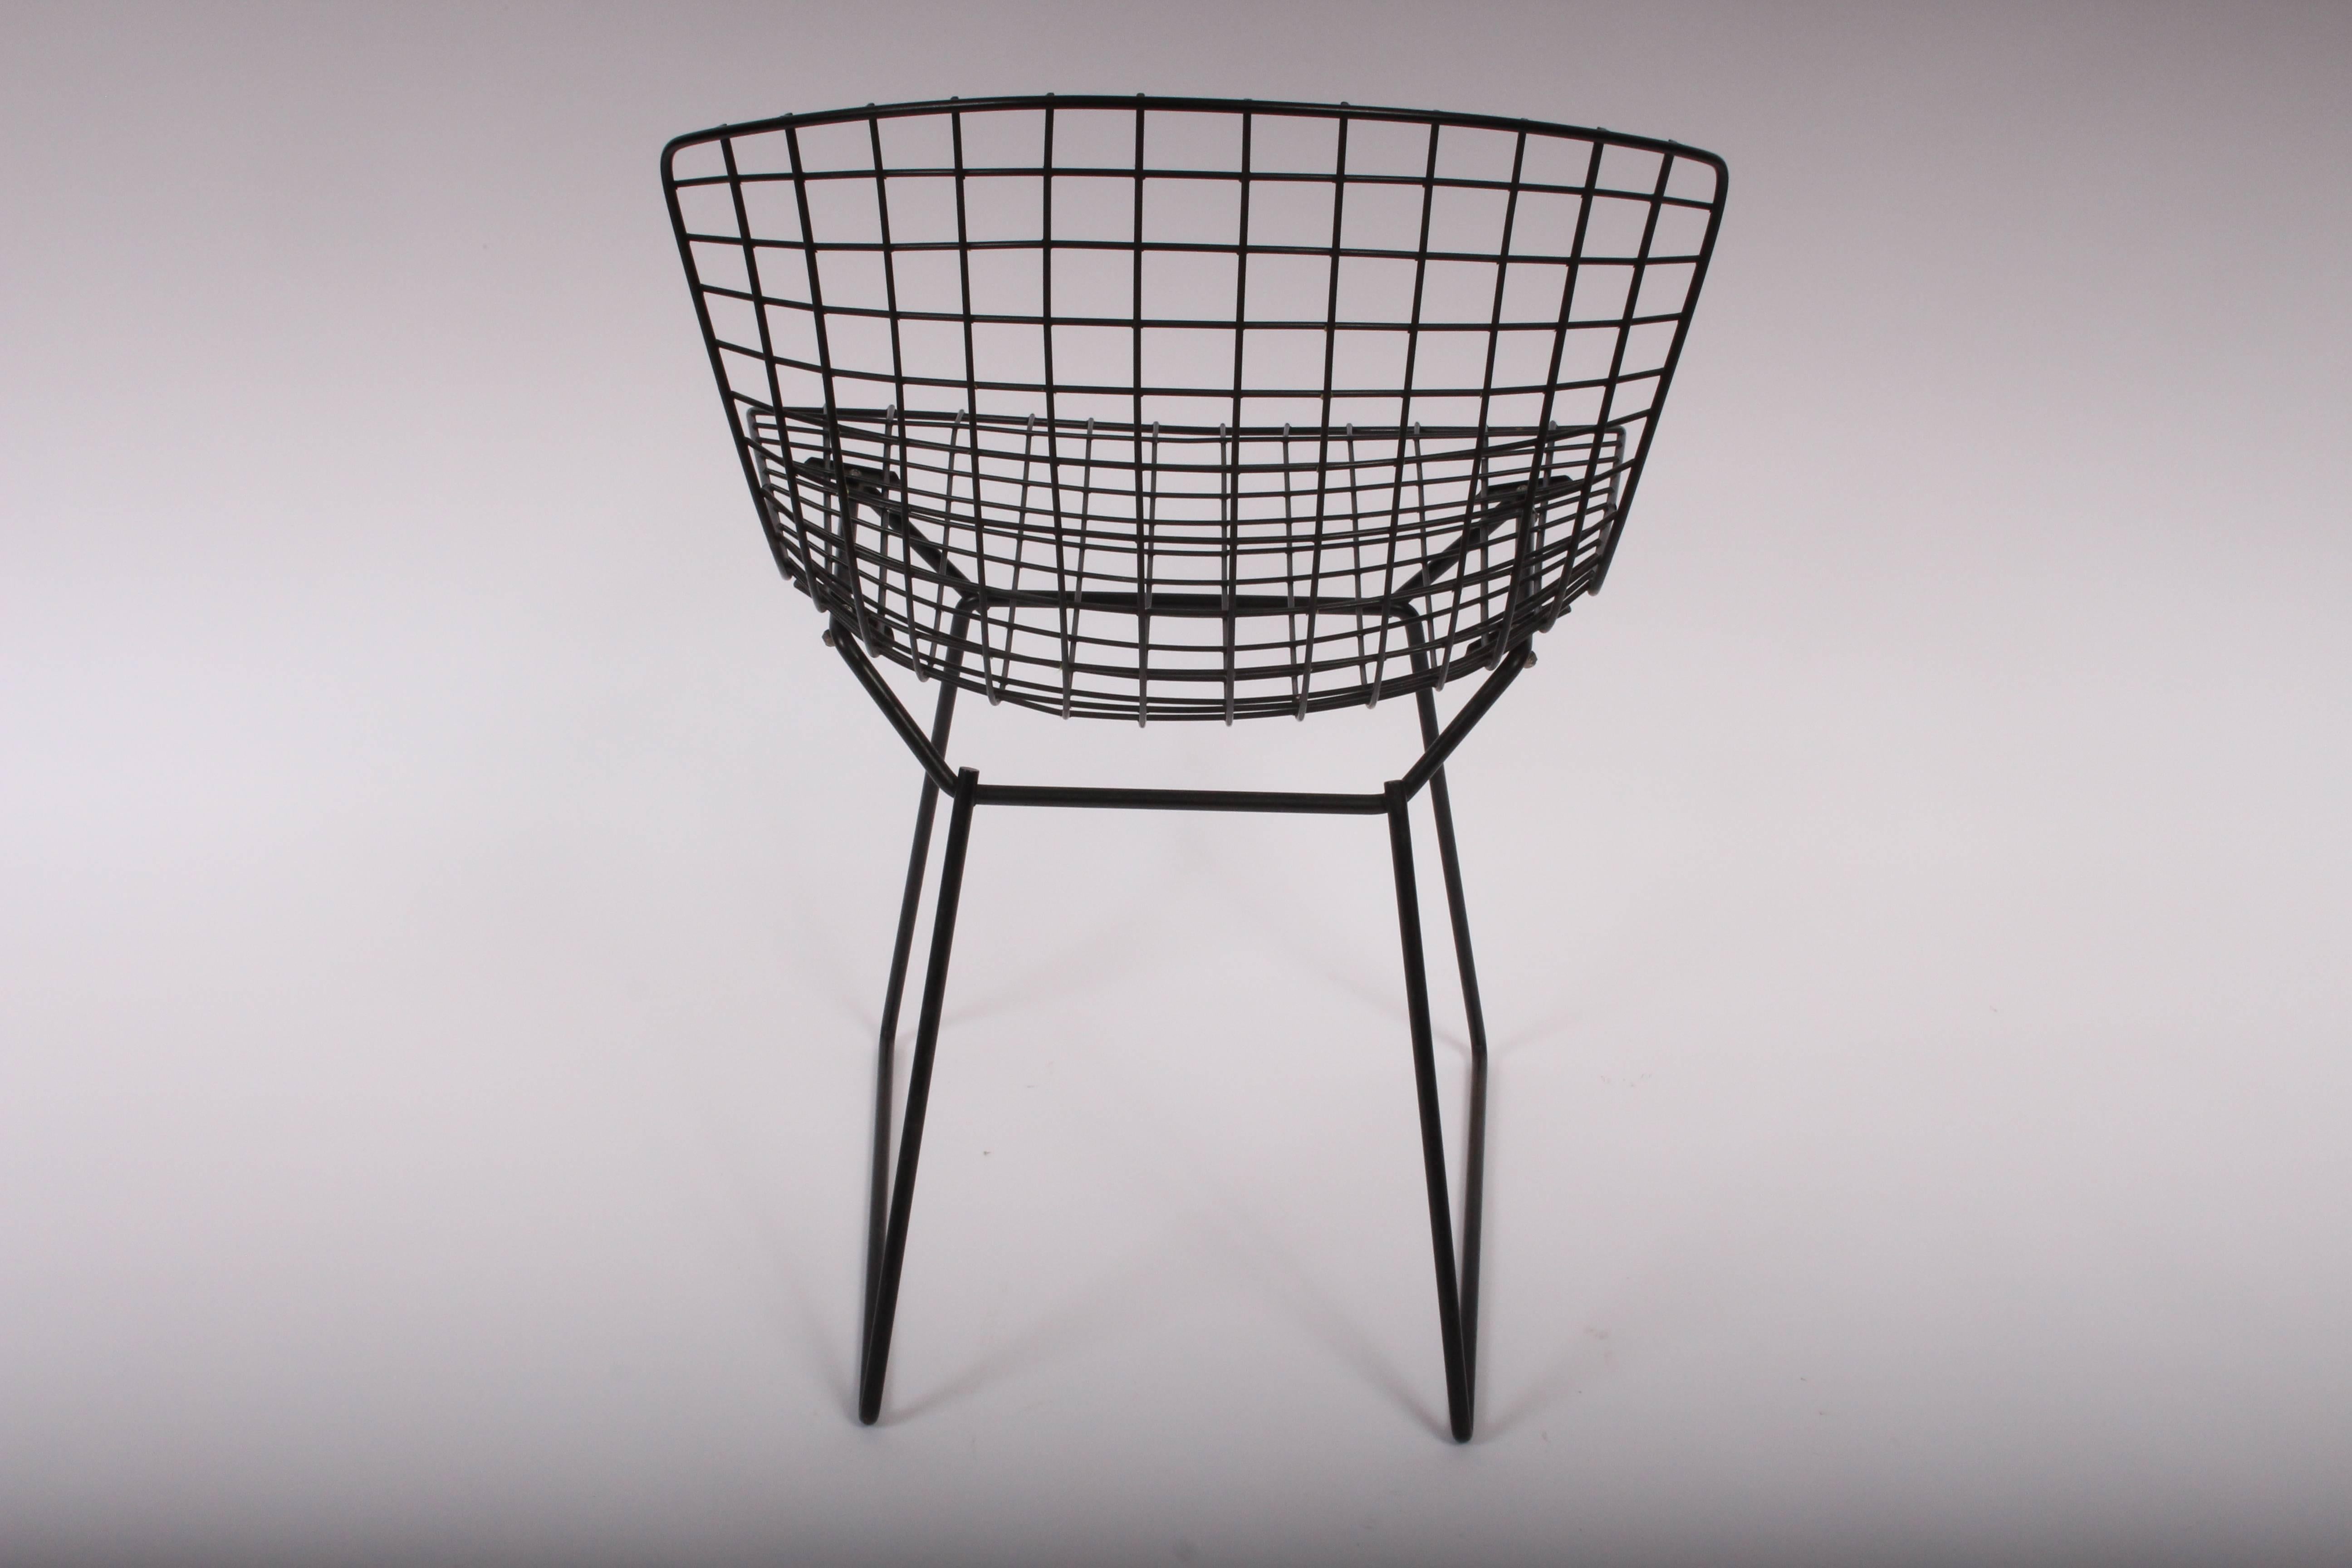 Early Set of Four Harry Bertoia for Knoll indoor outdoor Black Wire Dining Chairs with two-piece seat cushions from the 1950s-1960s. Featuring enameled Black Wire frame with two-piece black vinyl seat and back pads. Most vinyl covers have knoll tag.